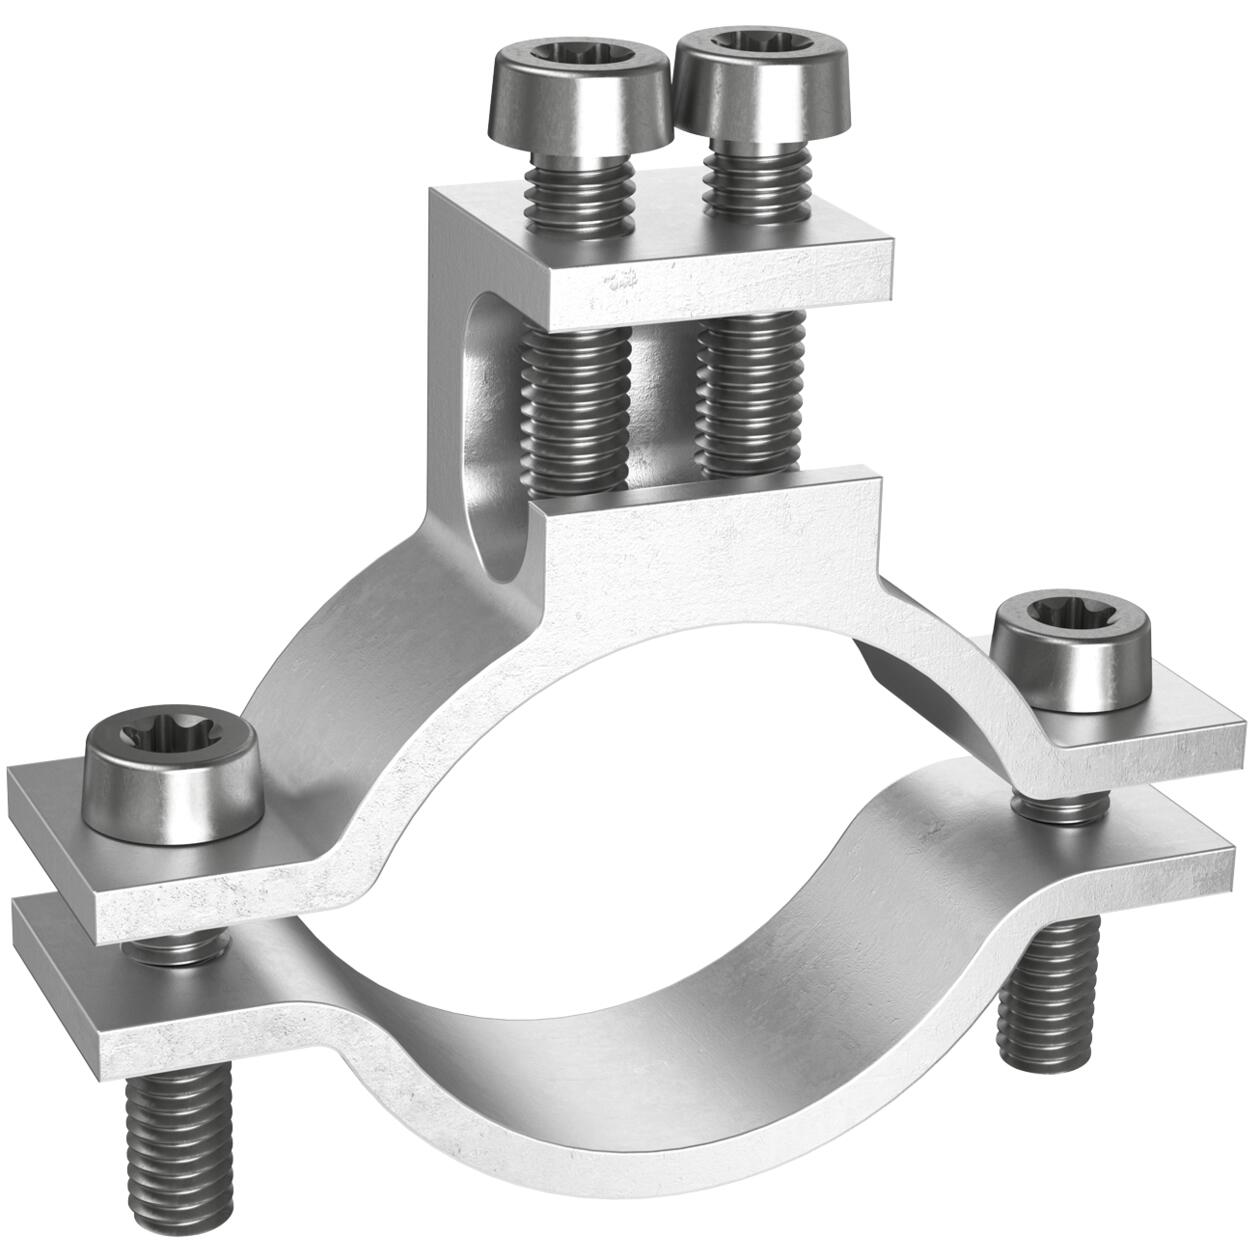 Earthing cleat 1 - 1¼, Earth connection clamp